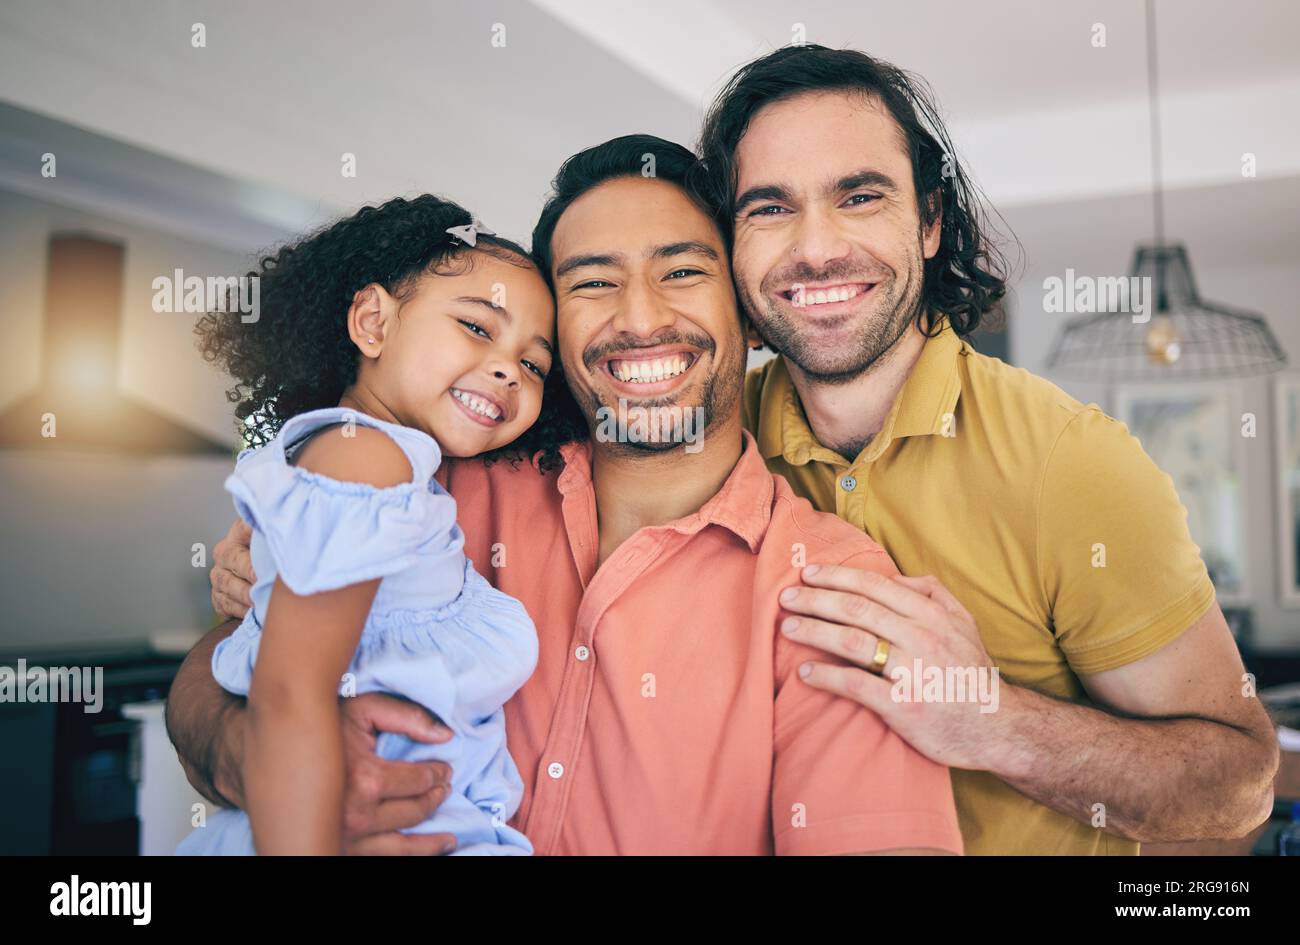 LGBT, portrait and girl child hug parents, happy and smile while enjoying family time in their home together. Gay, love fathers with foster kid in a Stock Photo